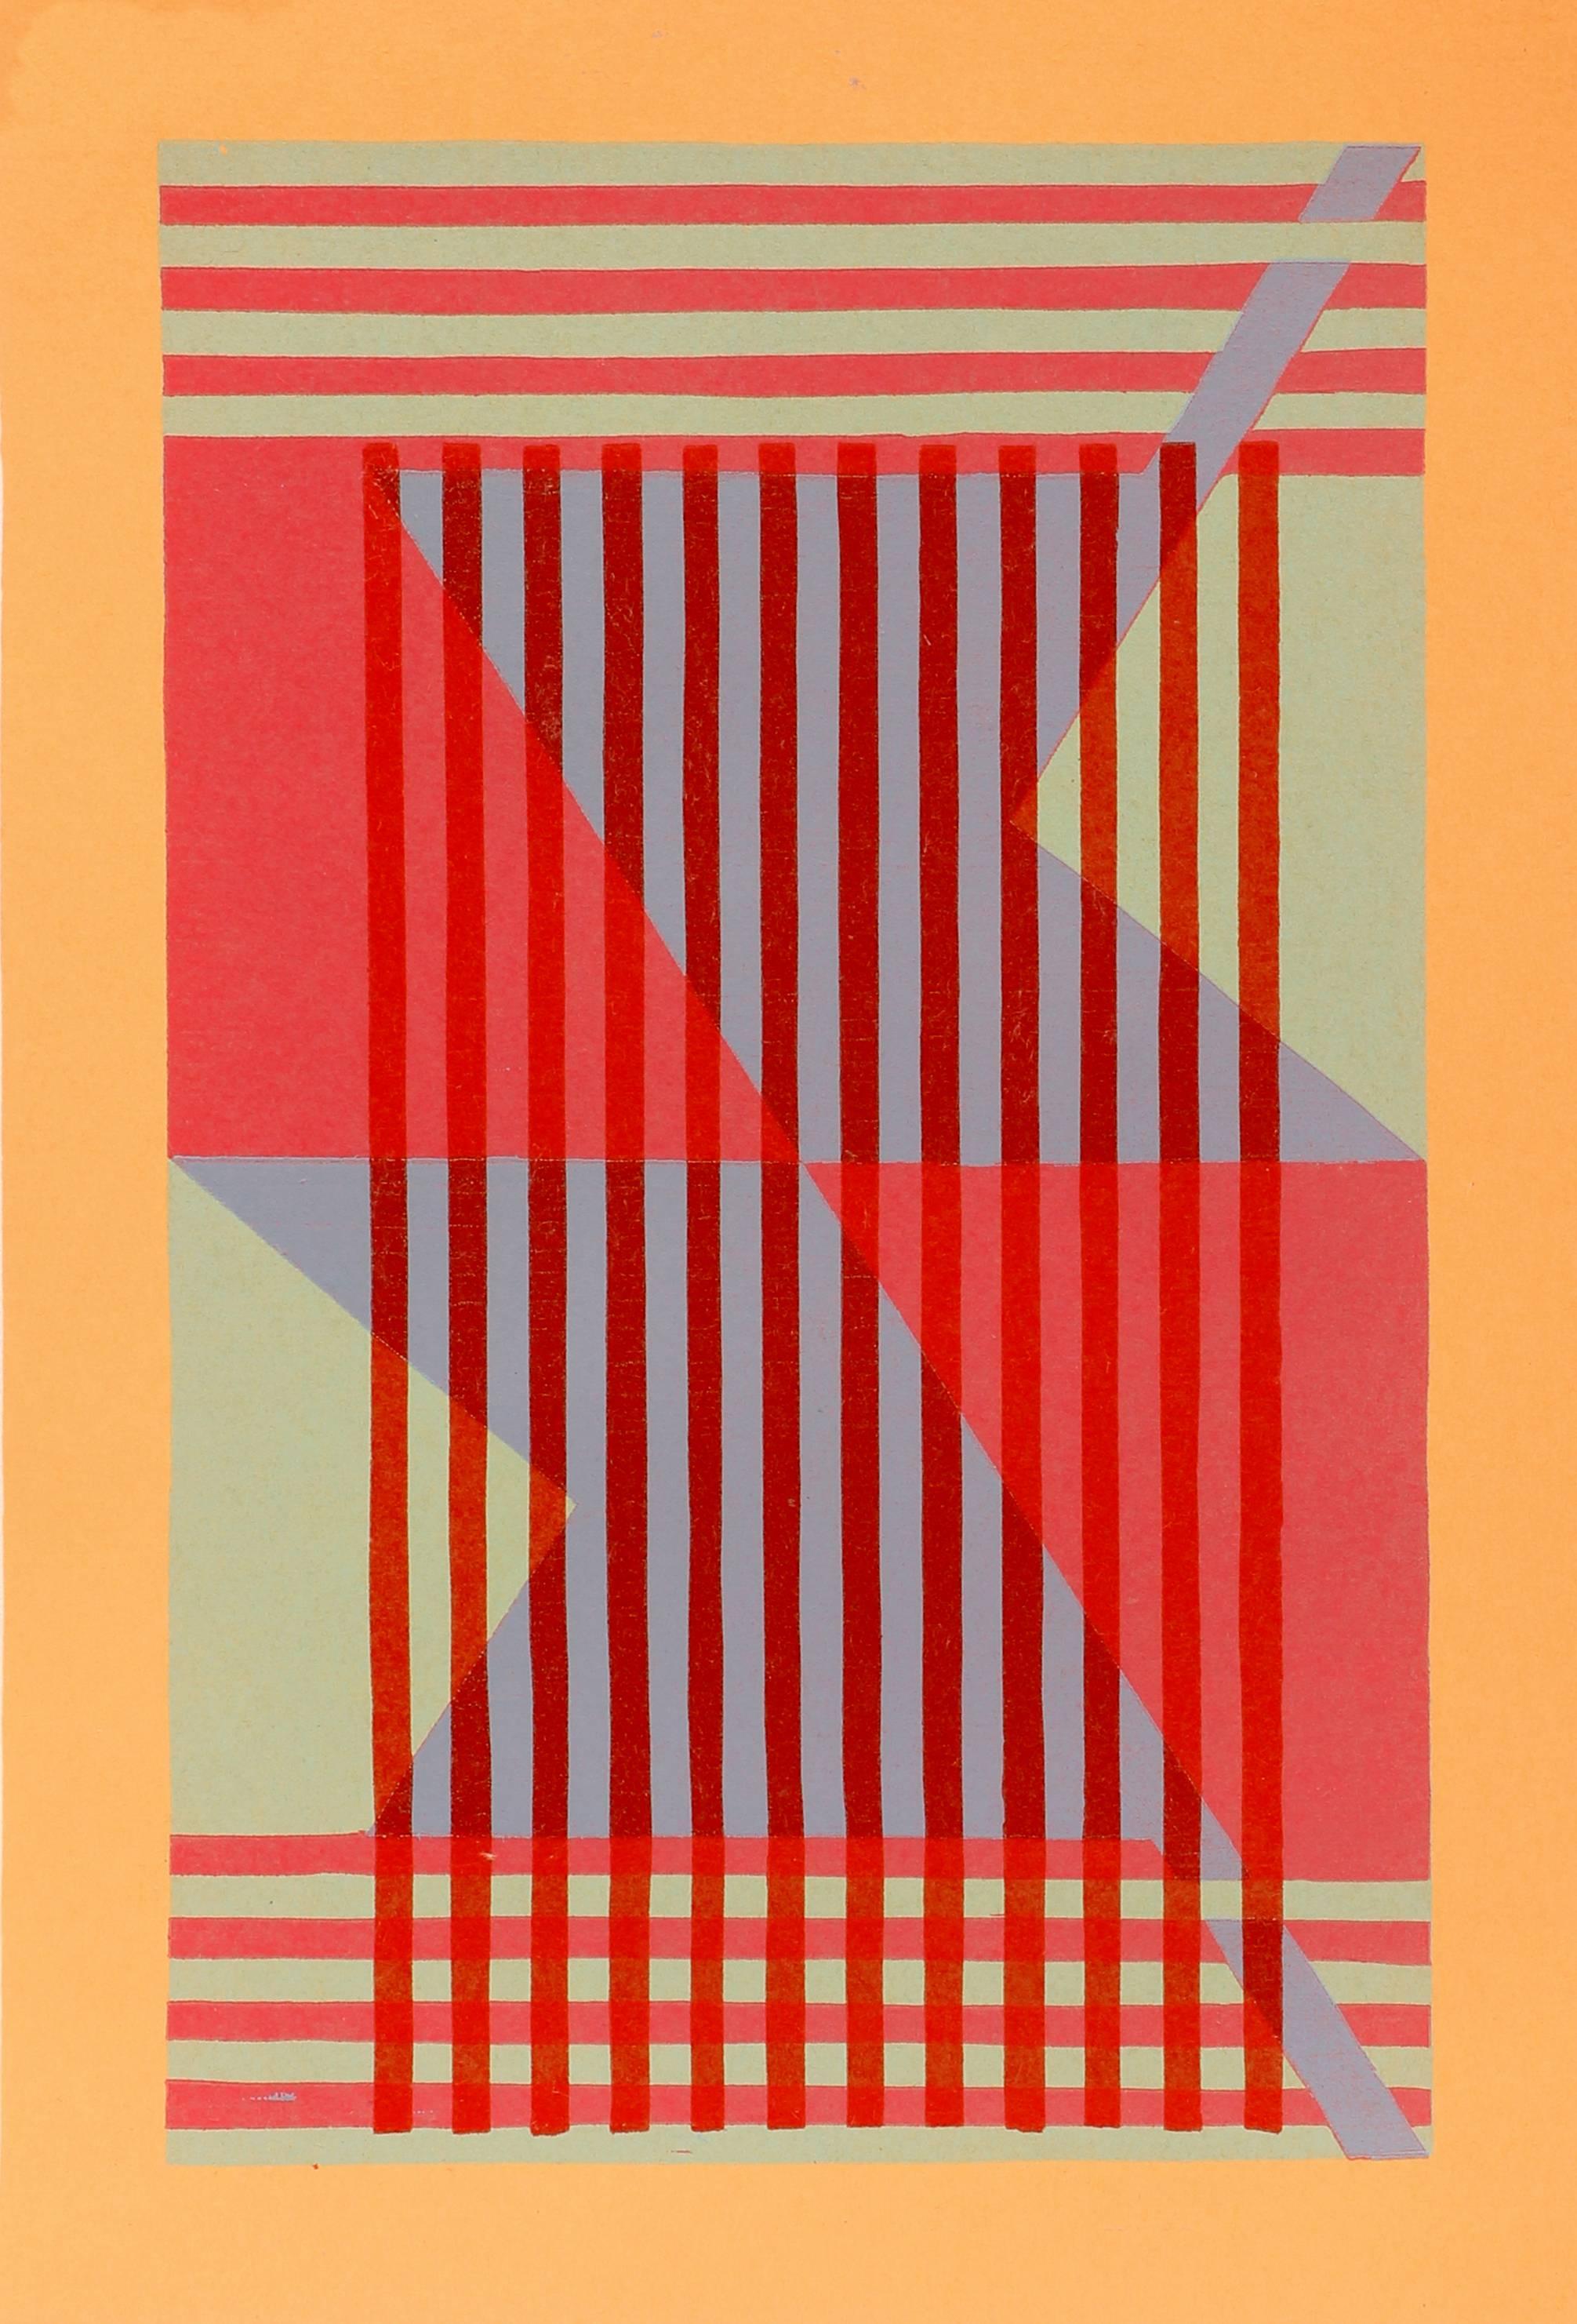 Mid-Century Modern geometric abstract print by American artist Toma Tovanovich (1931- 2016).  Tovanovich's work is found in many public and private collections all over the world. Circa 1960, unframed, signed "Toma Yovanovich" lower right, edition